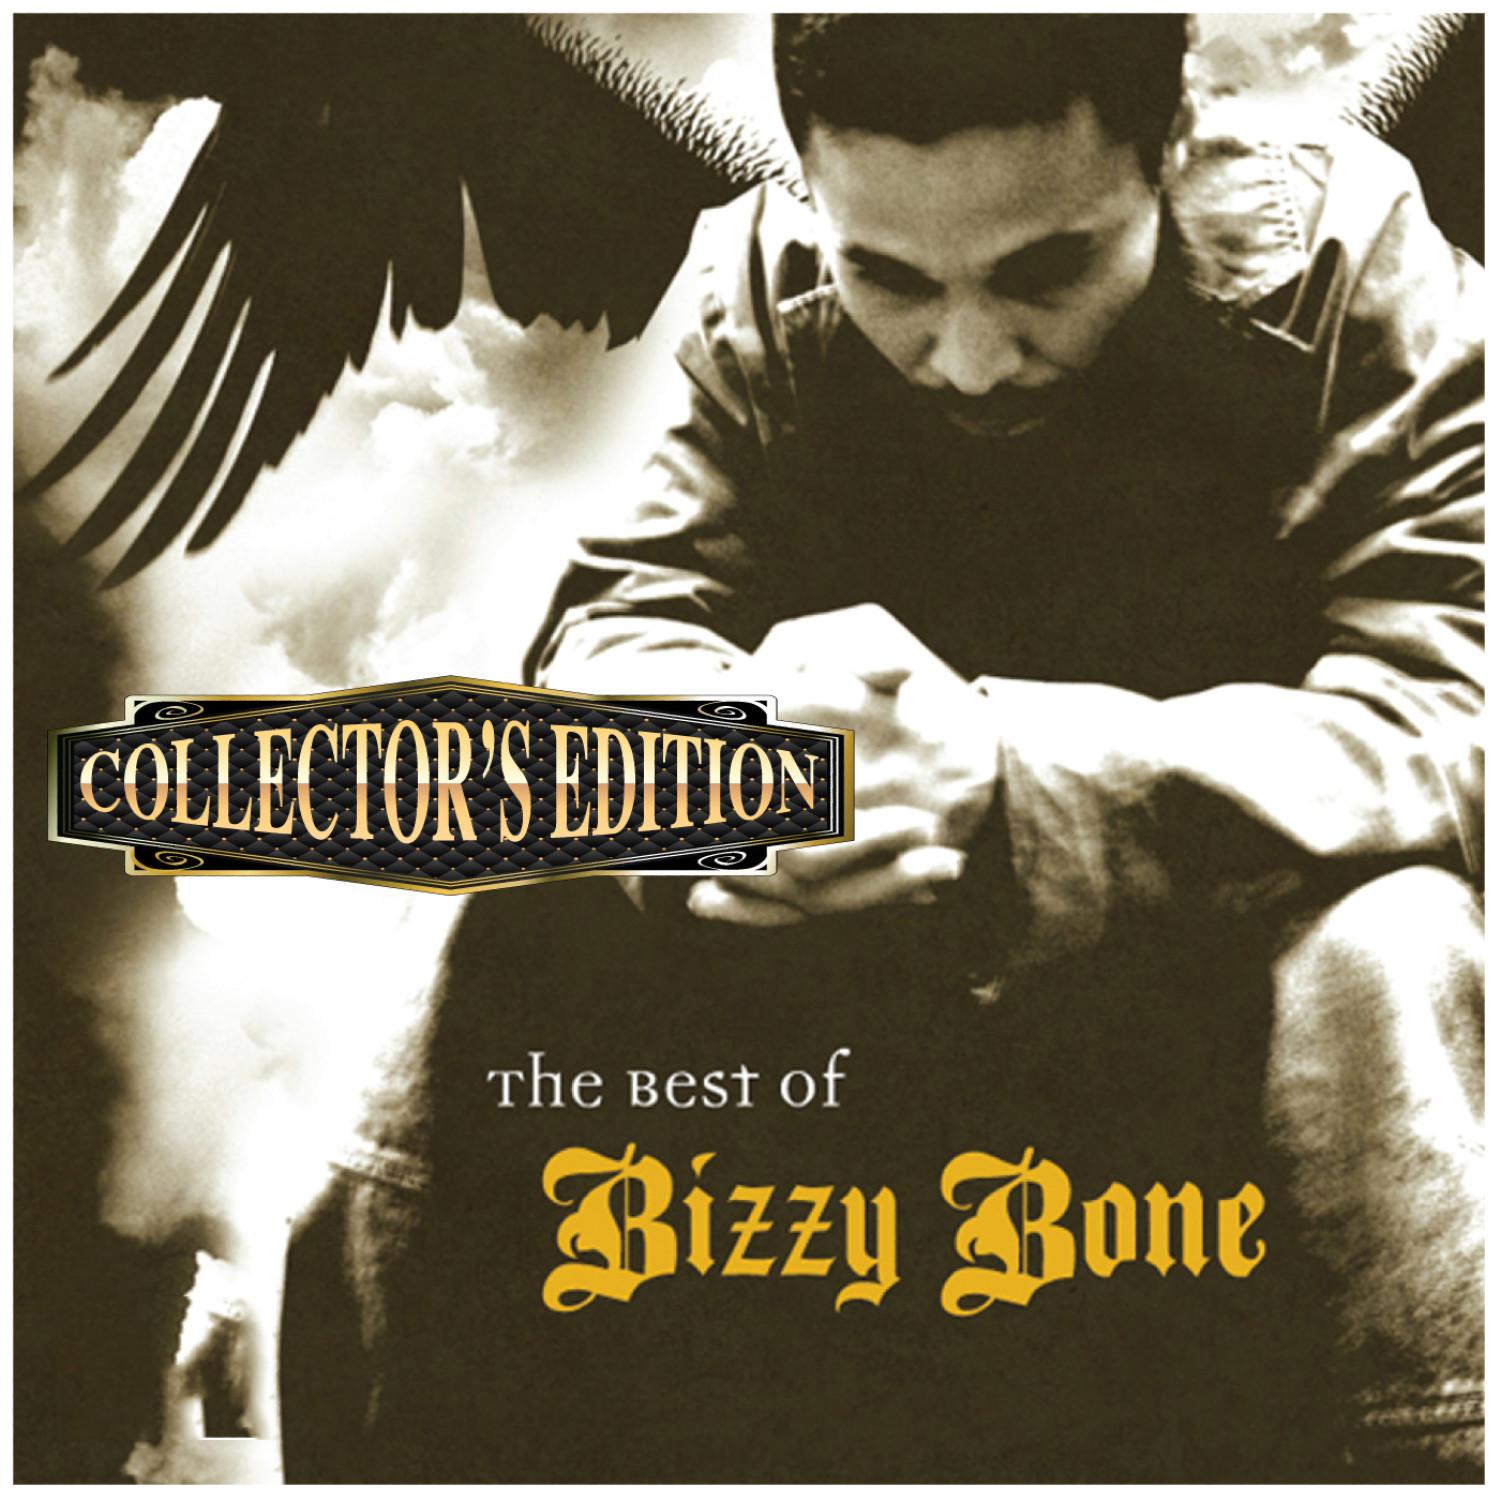 The Best of Bizzy Bone (Collector's Edition)